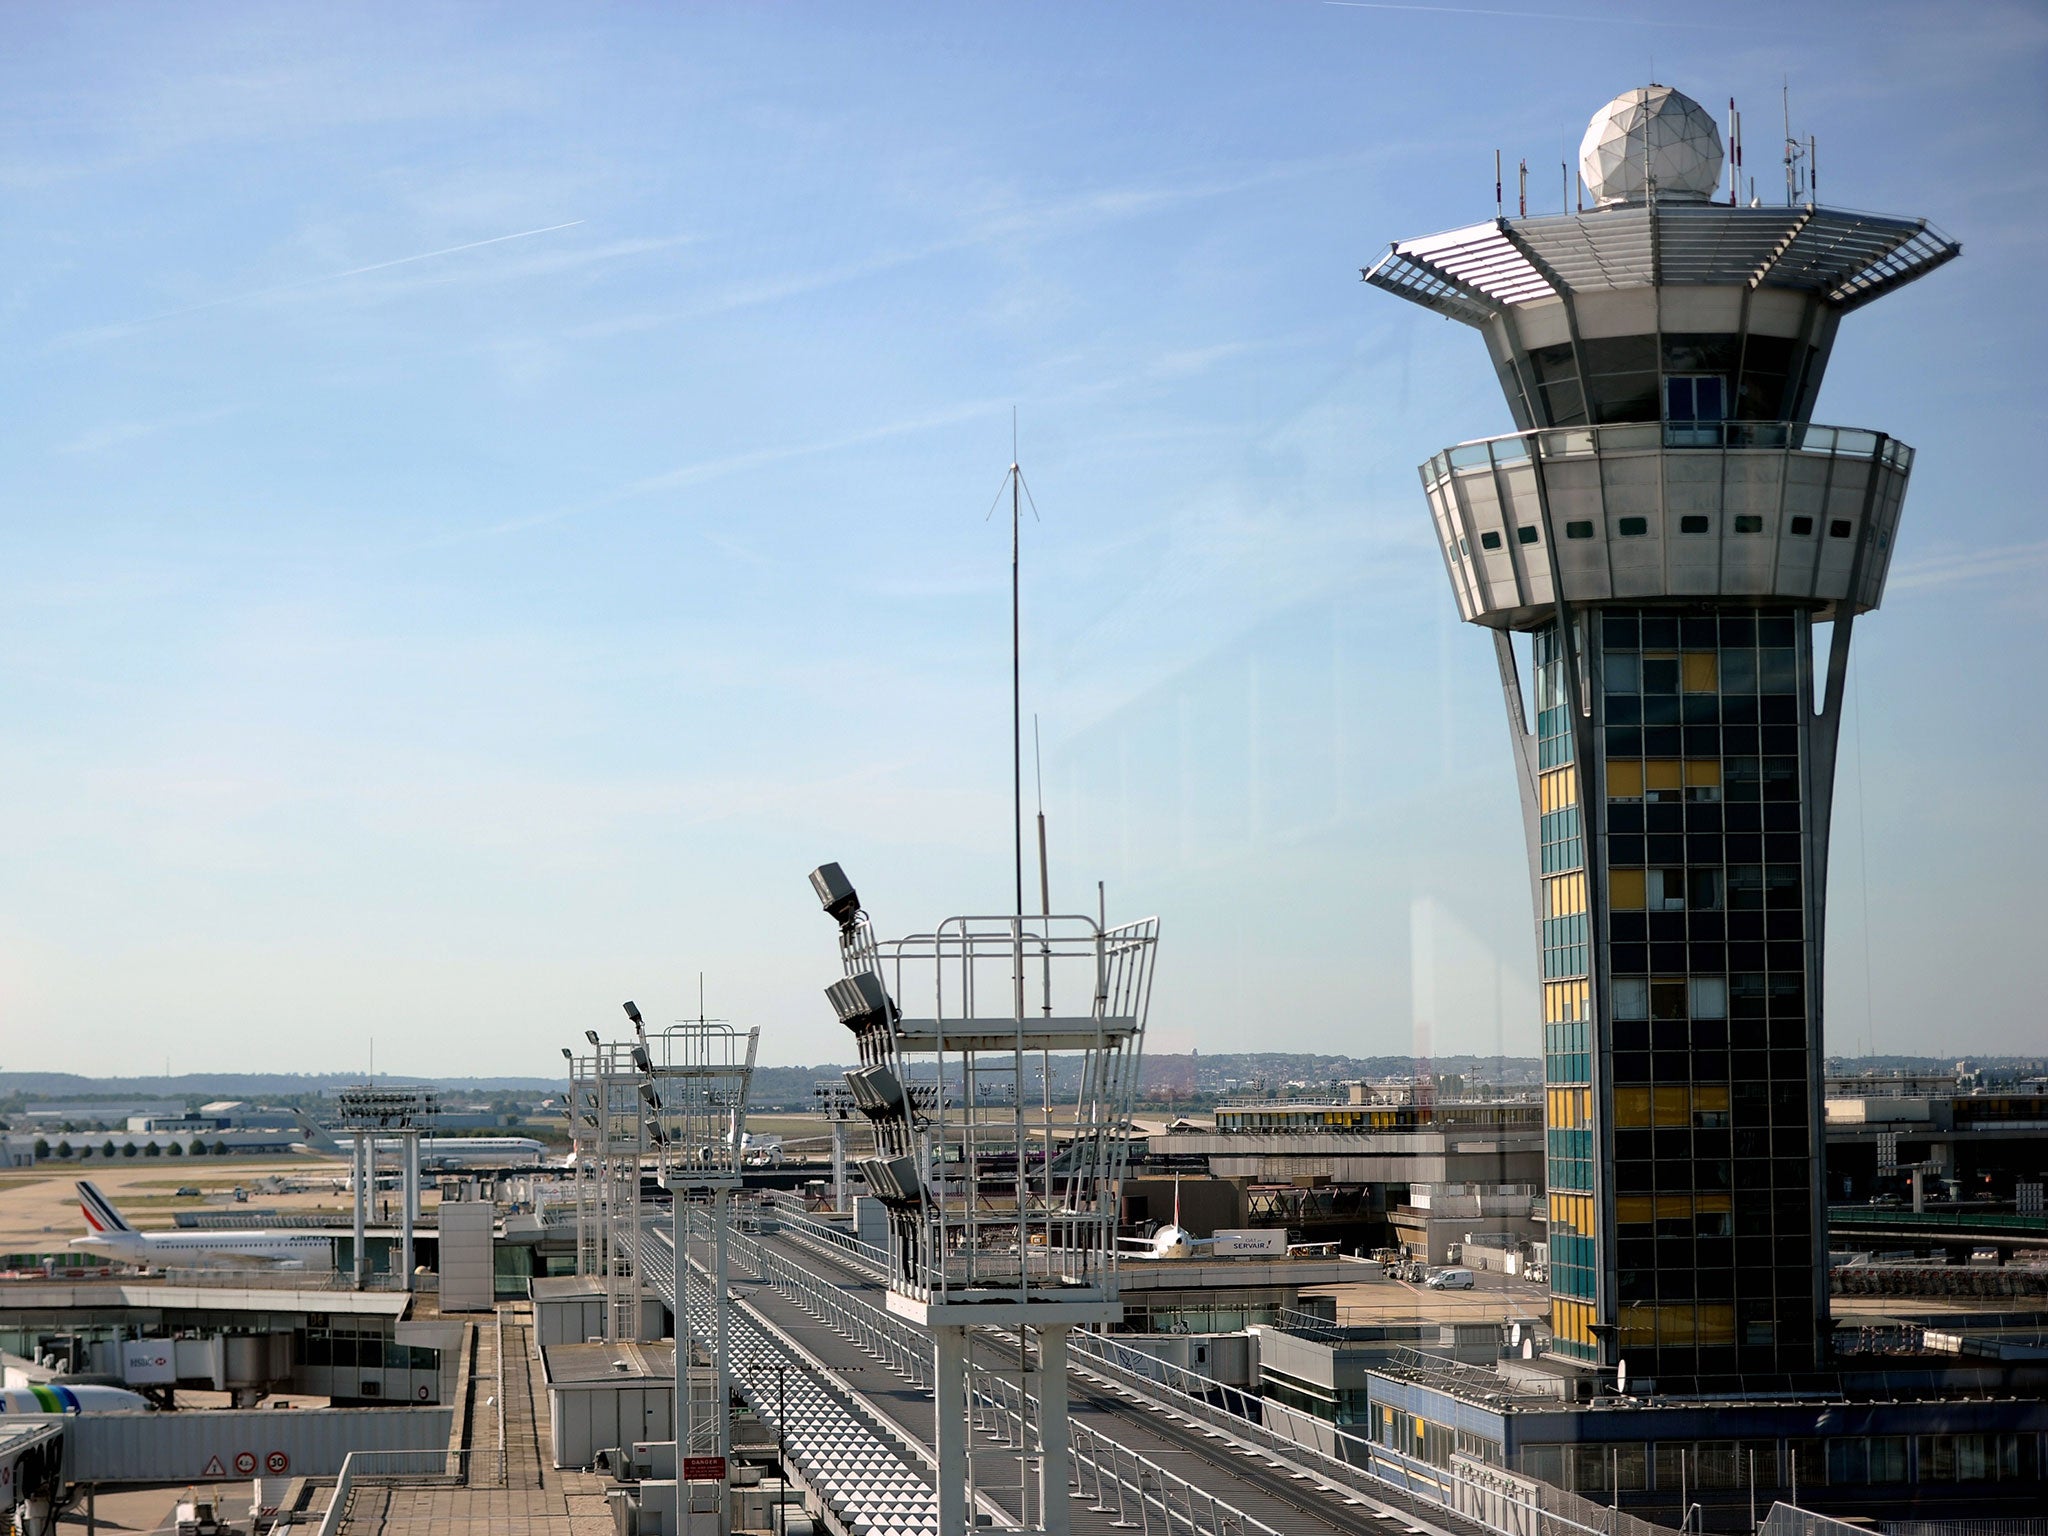 Paris Orly airport where Heitor Lourenco was detained